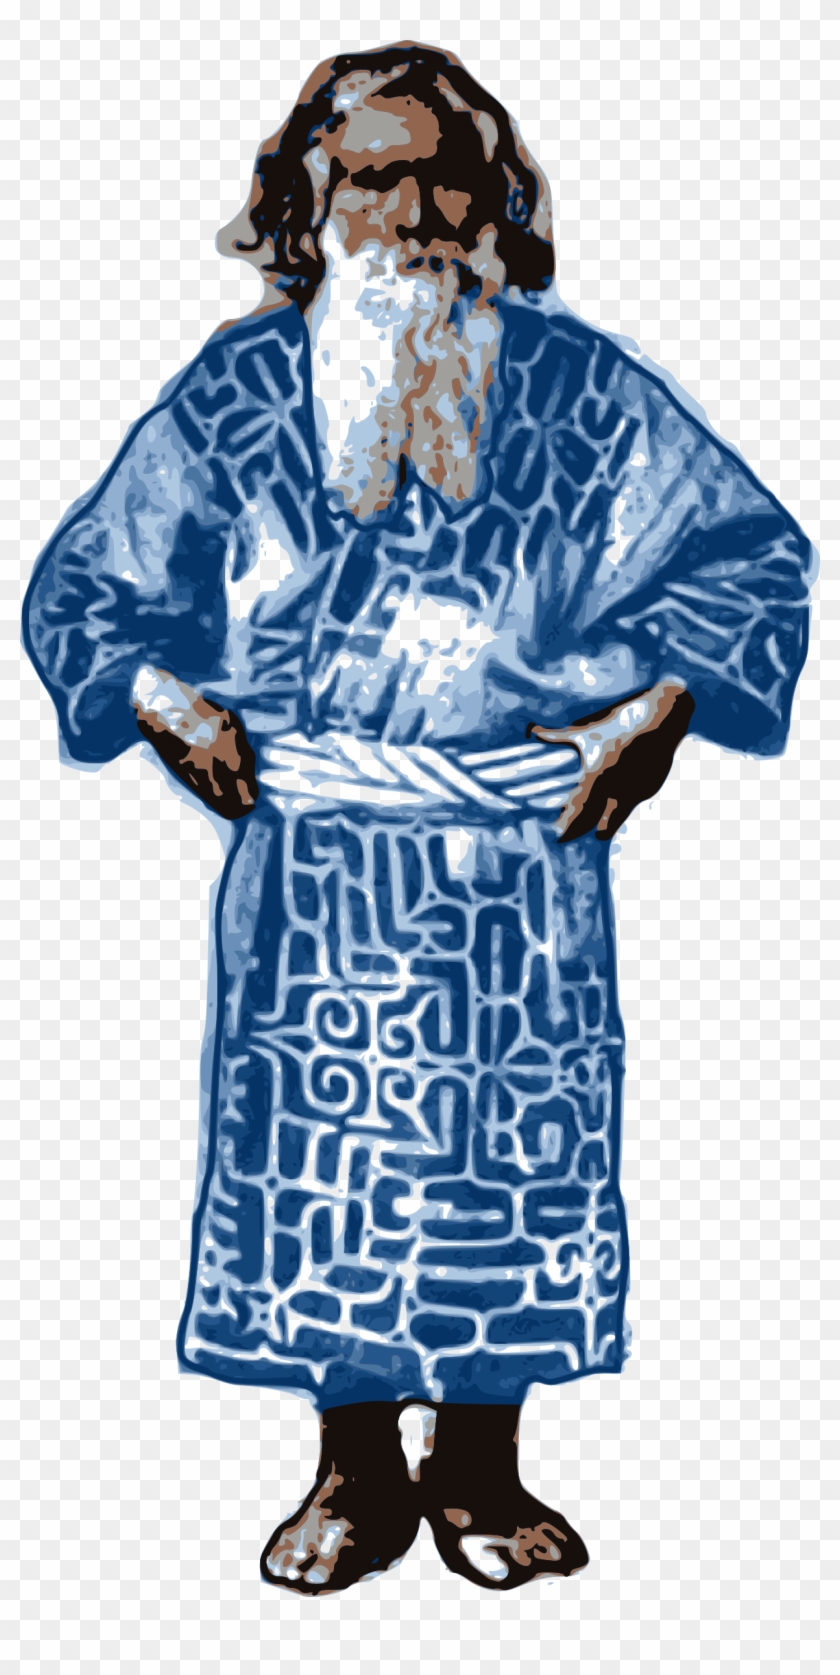 This Free Icons Png Design Of Ainu Man Of Japan - Ainu Clipart Transparent Png #2372991